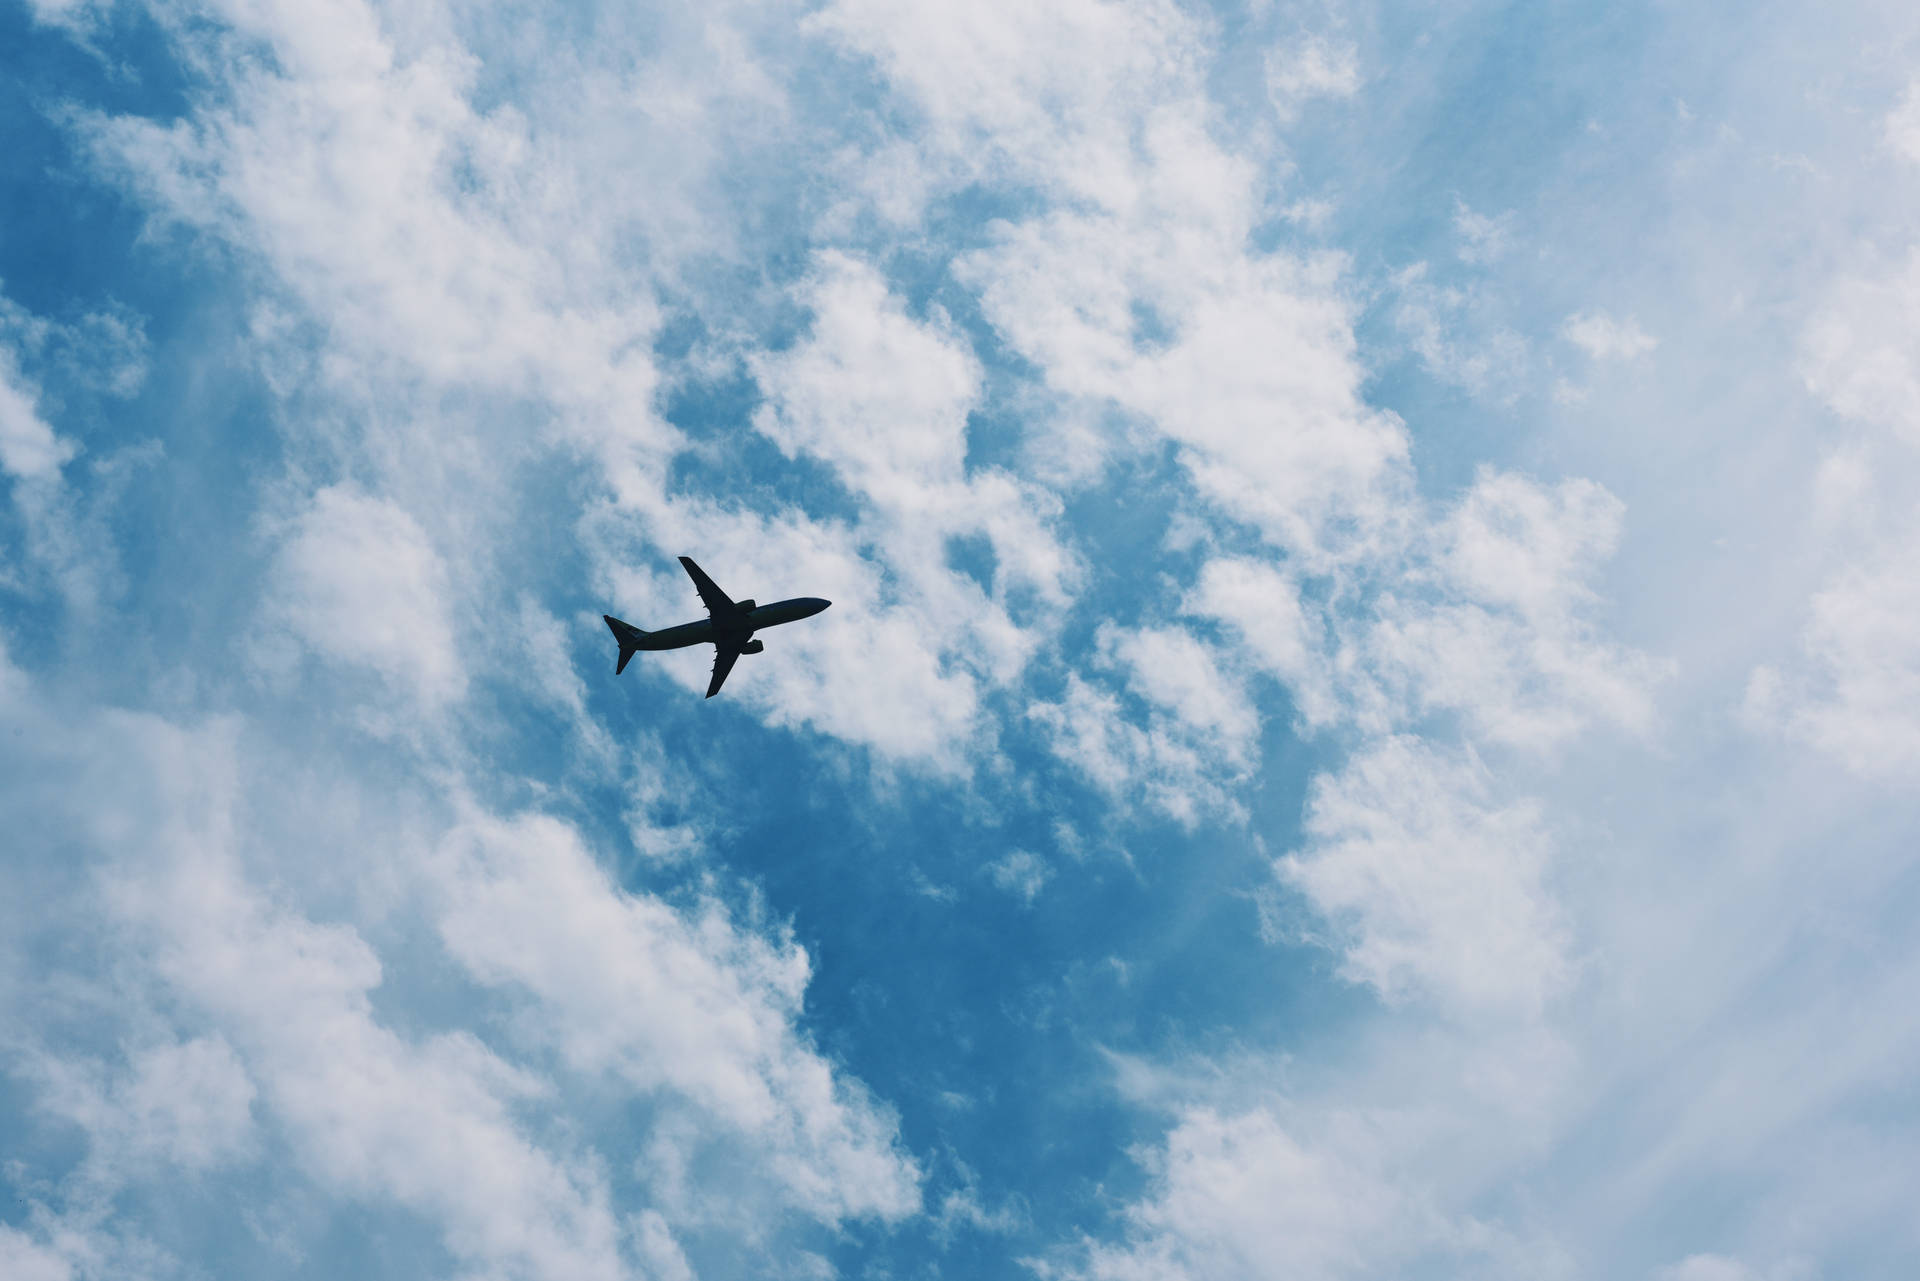 A passenger airplane soaring high in the sky. Wallpaper